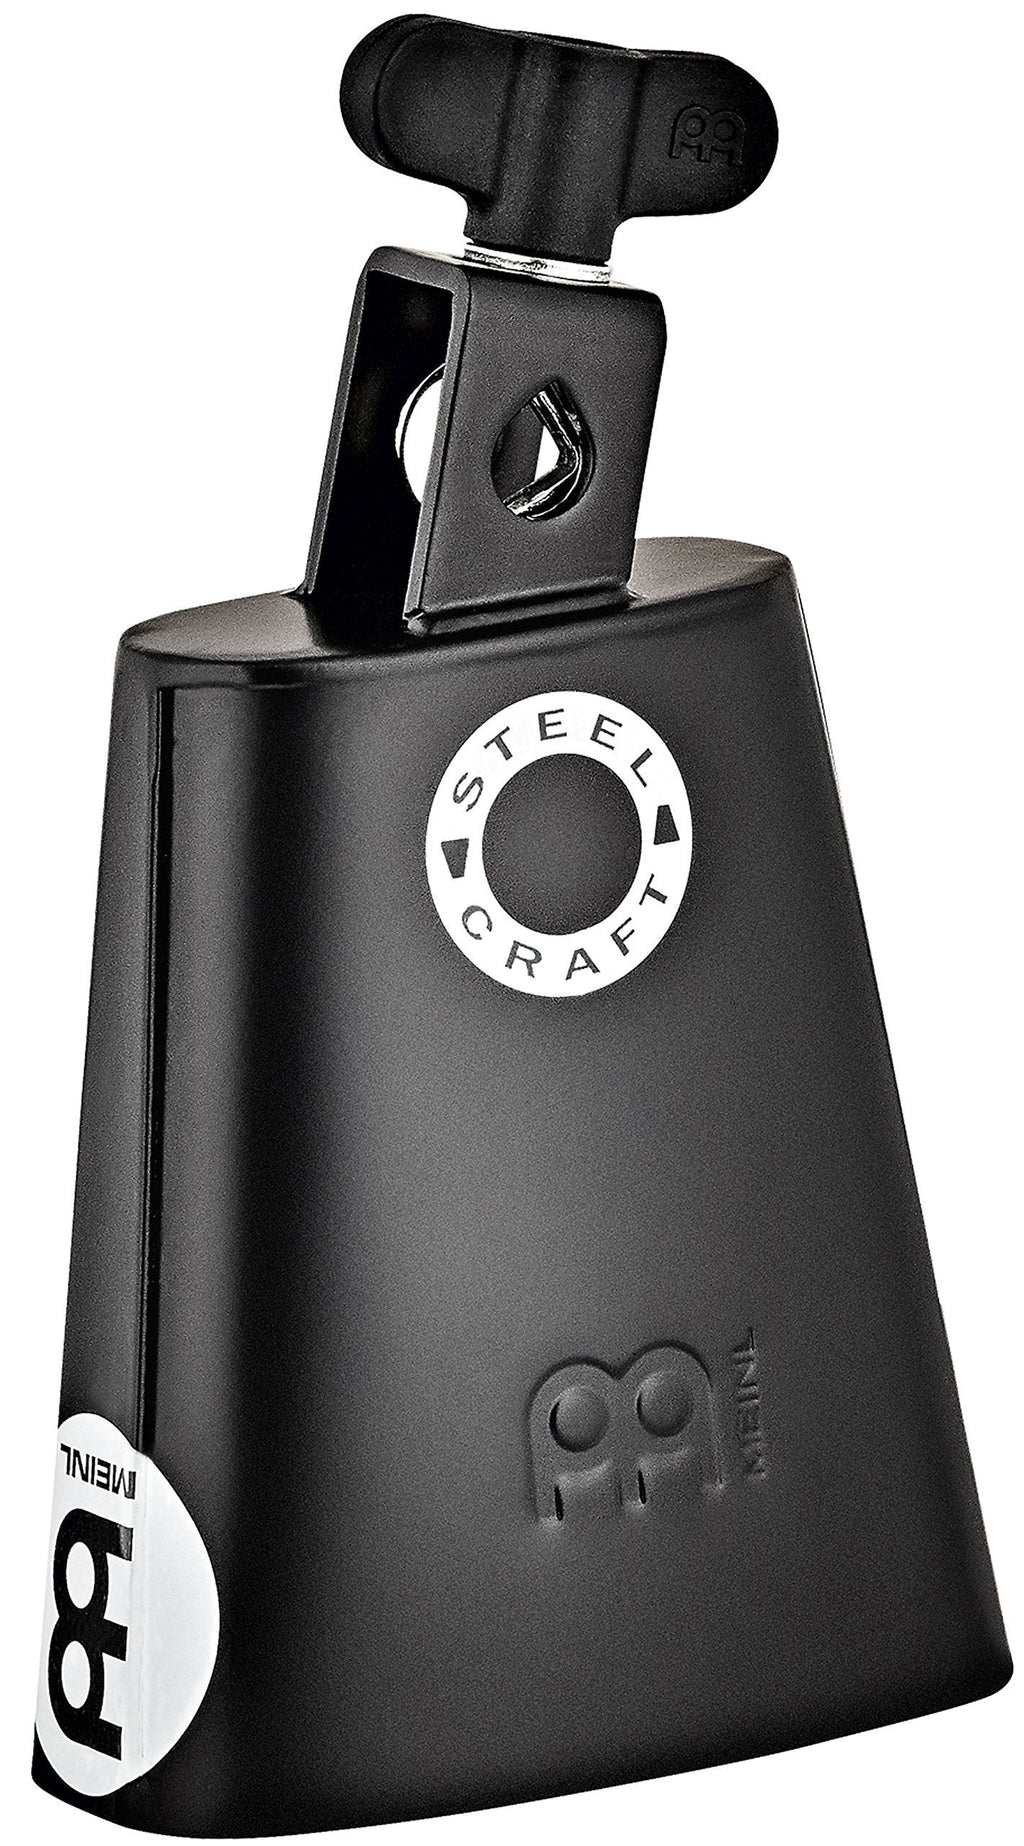 Meinl Percussion Cowbell with Black Powder Coated Steel and Mounting Clamp, 4 3/4" Mouth - NOT MADE IN CHINA - Ideal for Classic Rock Genres, 2-YEAR WARRANTY (SCL475-BK) High Pitch